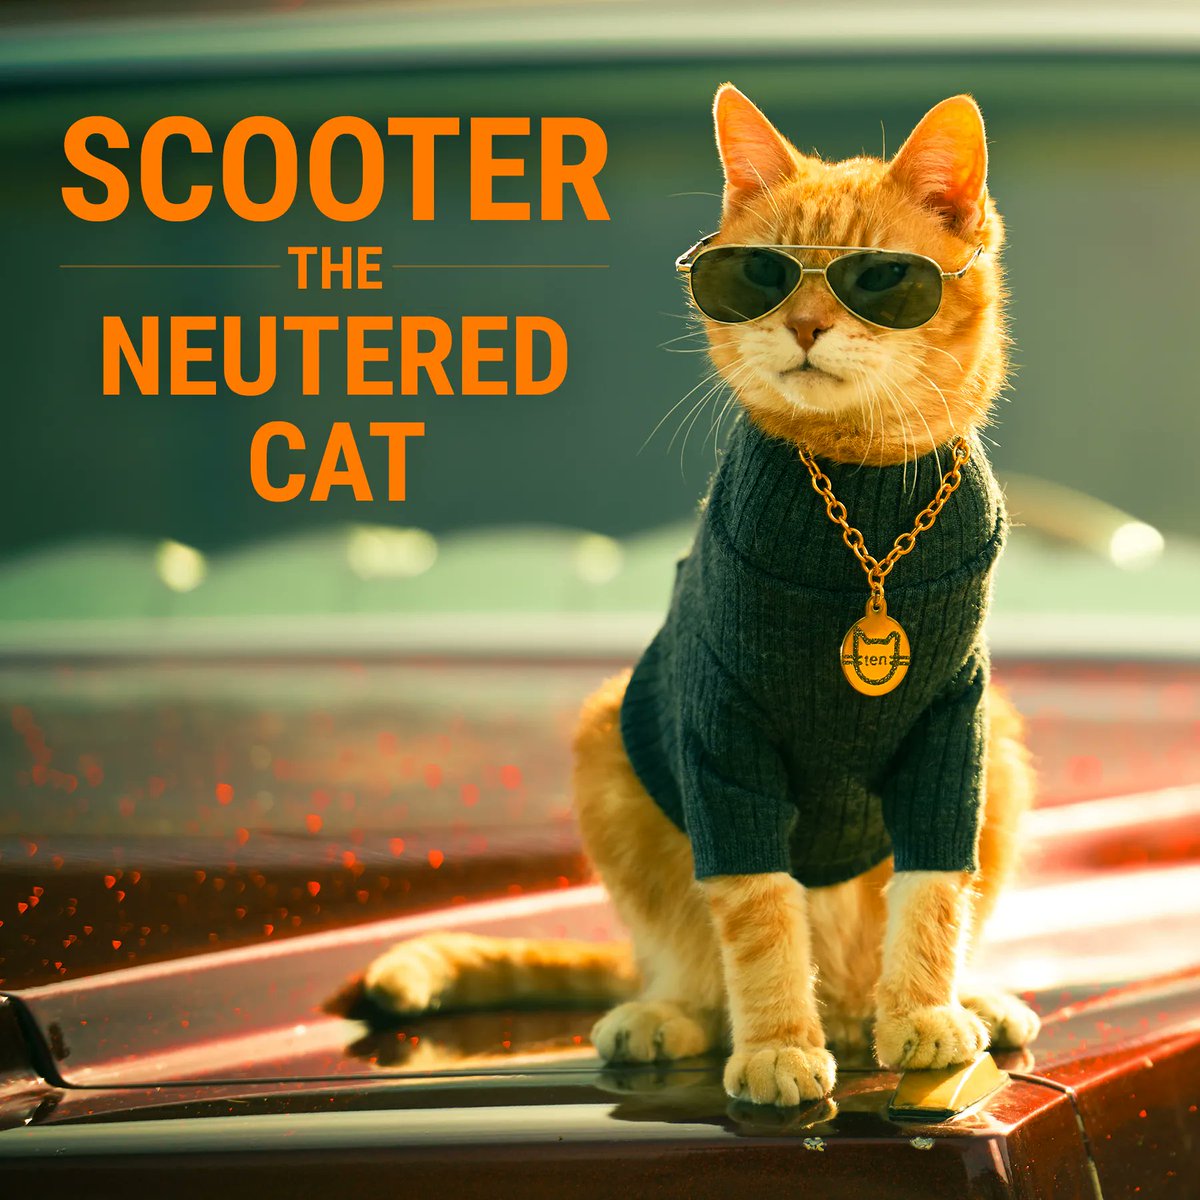 4 Facts About Me:
✂️ Getting neutered was the best choice I ever made 
🐈 I’m a cat-vocate working for a no-kill nation for cats 
🕶️ I’m famous for my hip spectacles and no testicles 
😼I’m single 

Follow me to join my mission to help cats!

#itsneuteredscooter givethemten